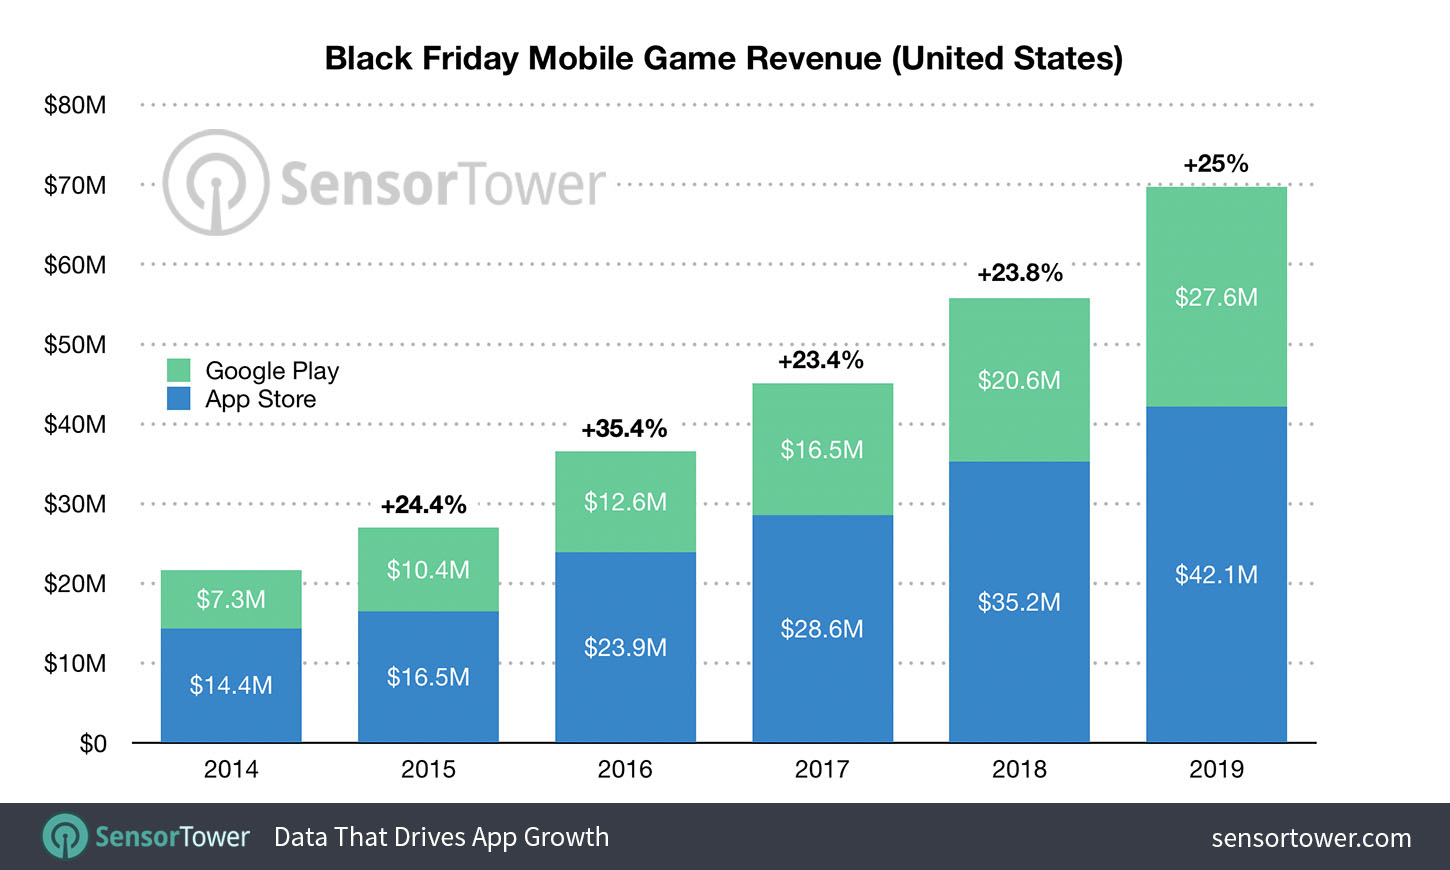 Black Friday year-on-year revenue comparison in the United States